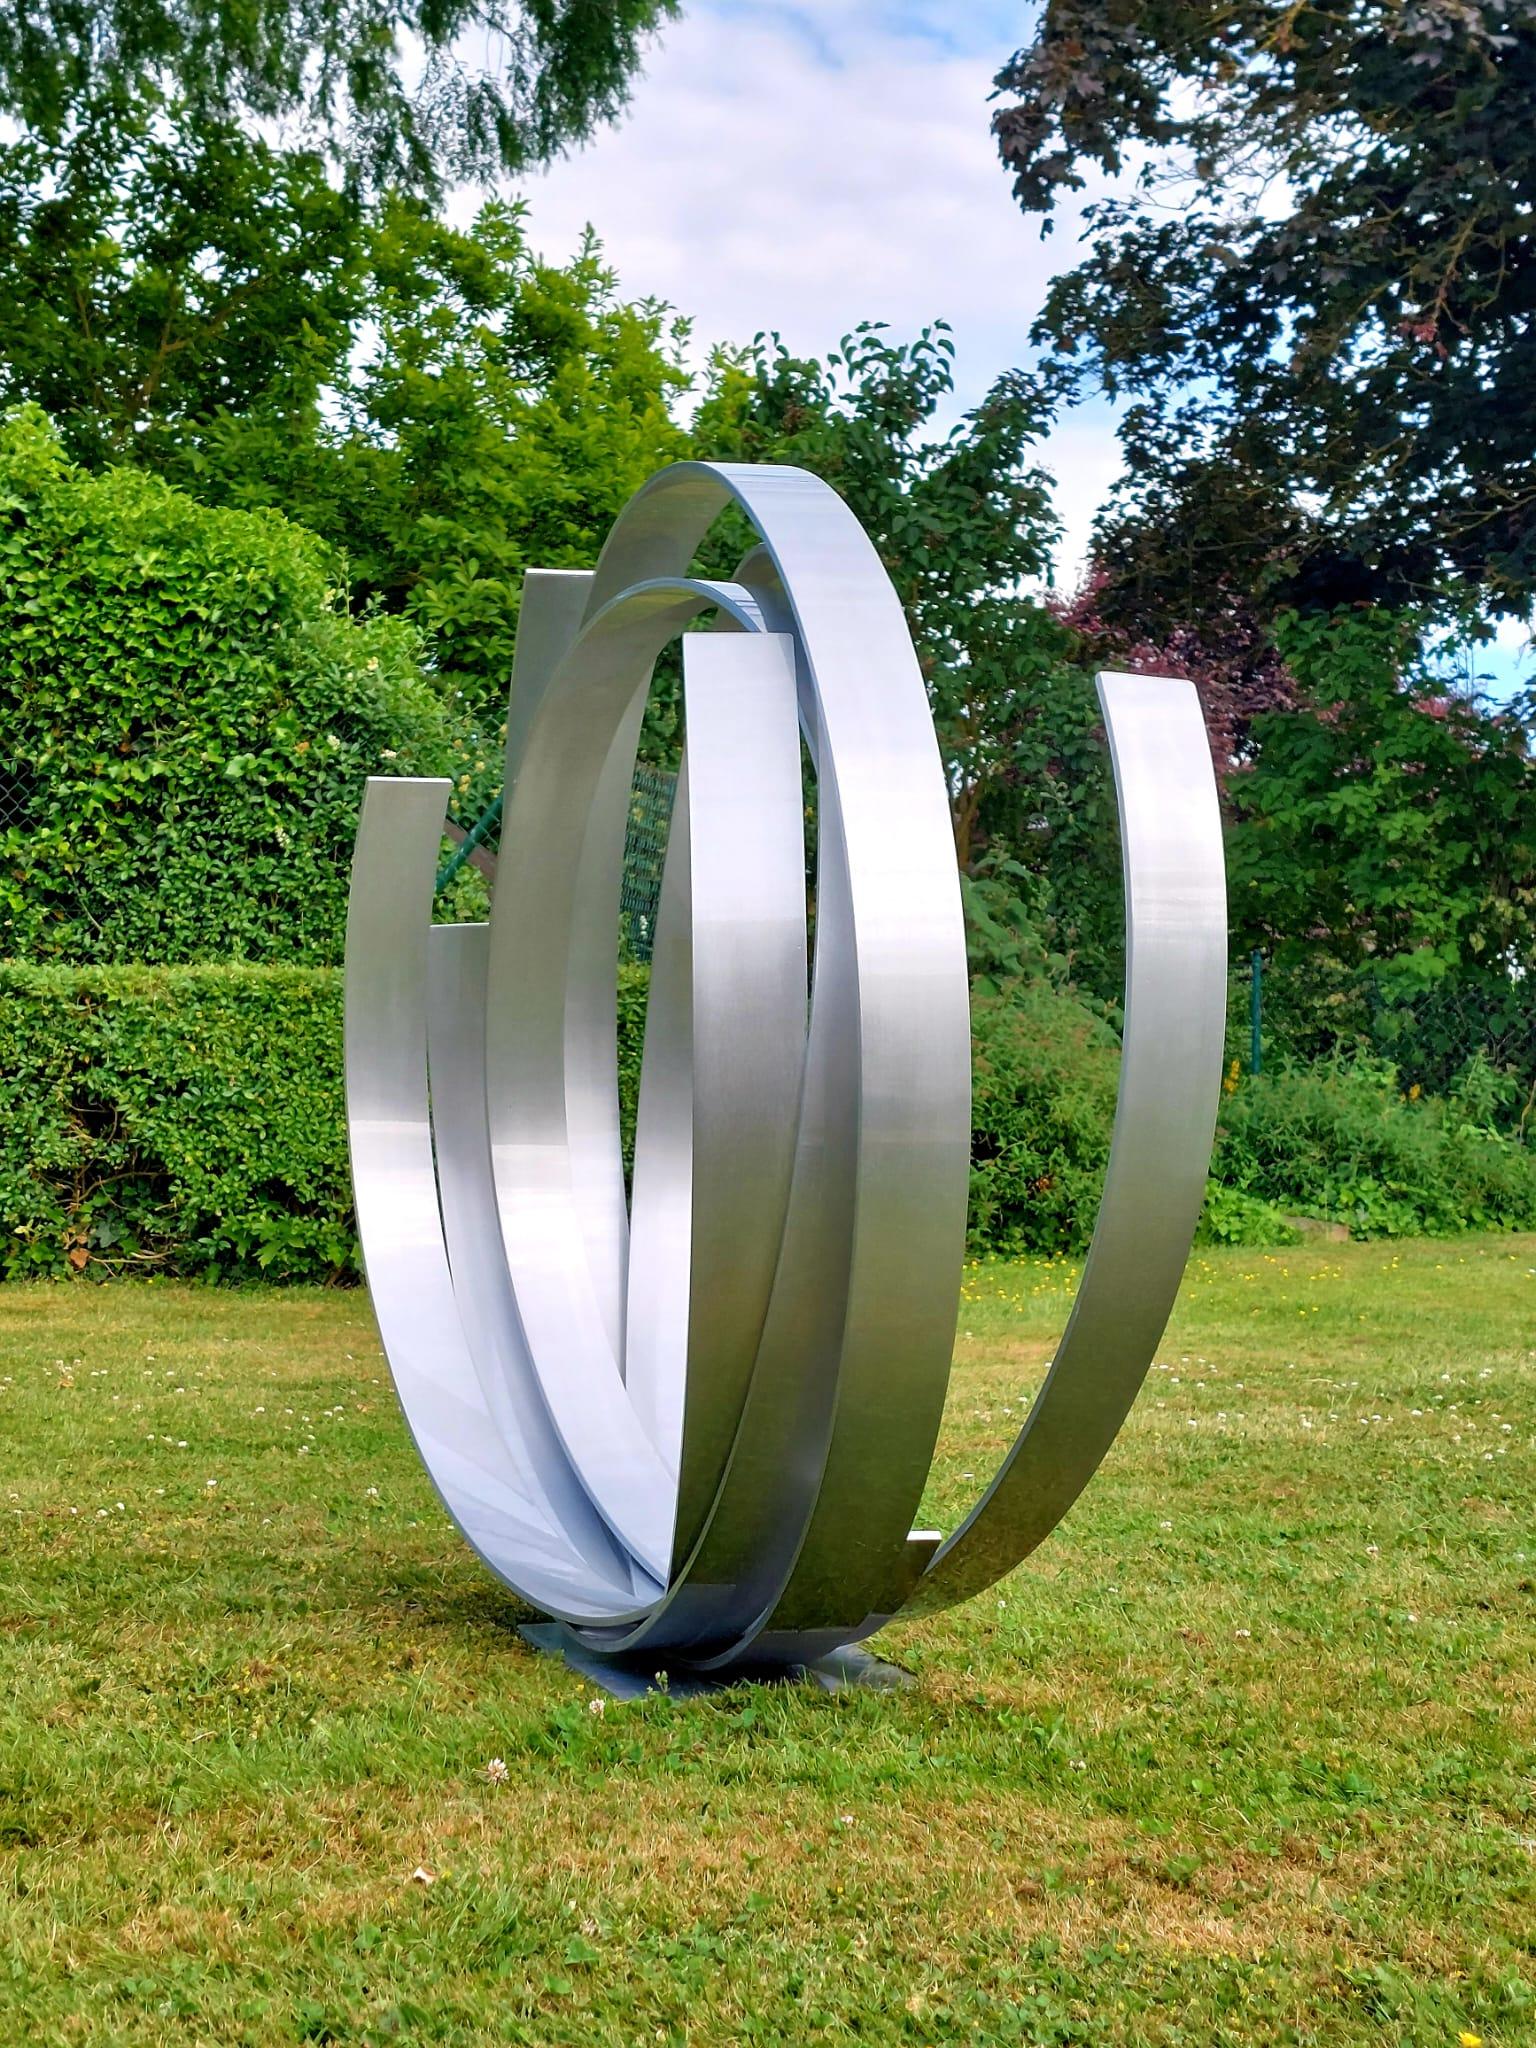 Timeless Orbit - Silver Contemporary Aluminum sculpture for Outdoors - Abstract Sculpture by Kuno Vollet